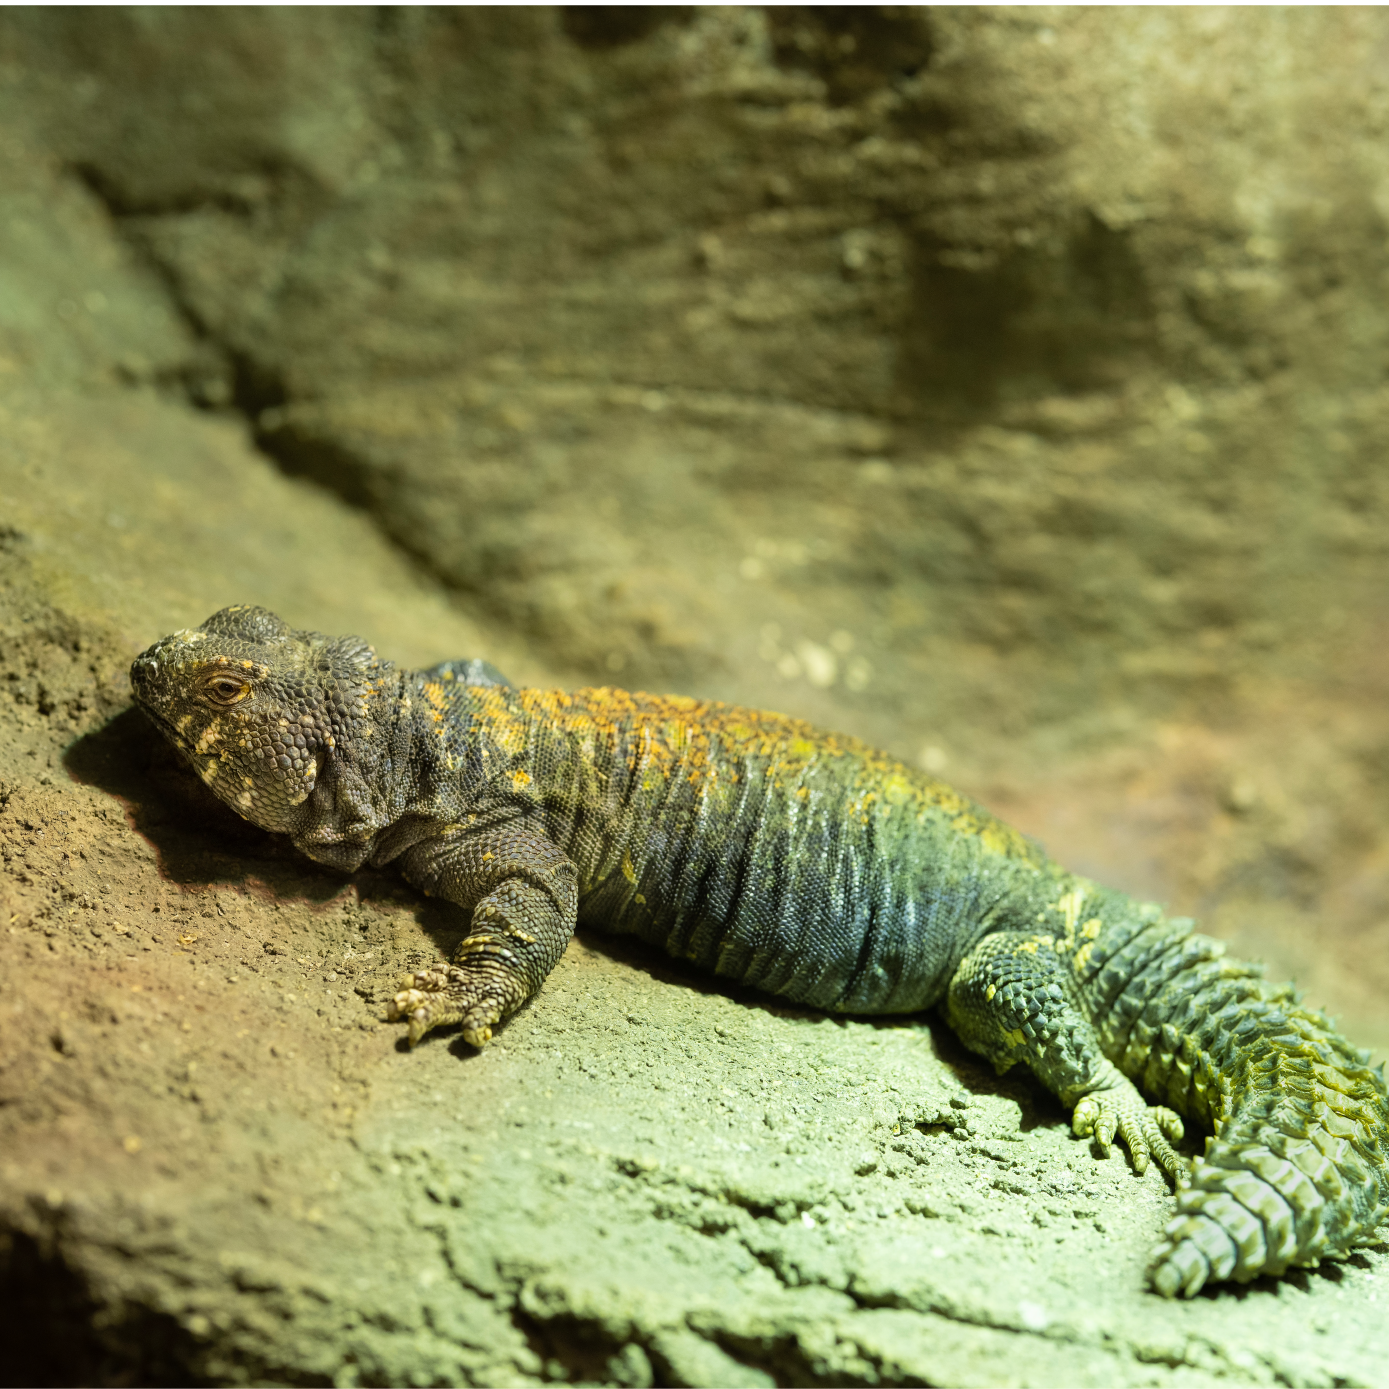 Uromastyx is chilling on a rock in Phailozoo 50 gallon reptile tank